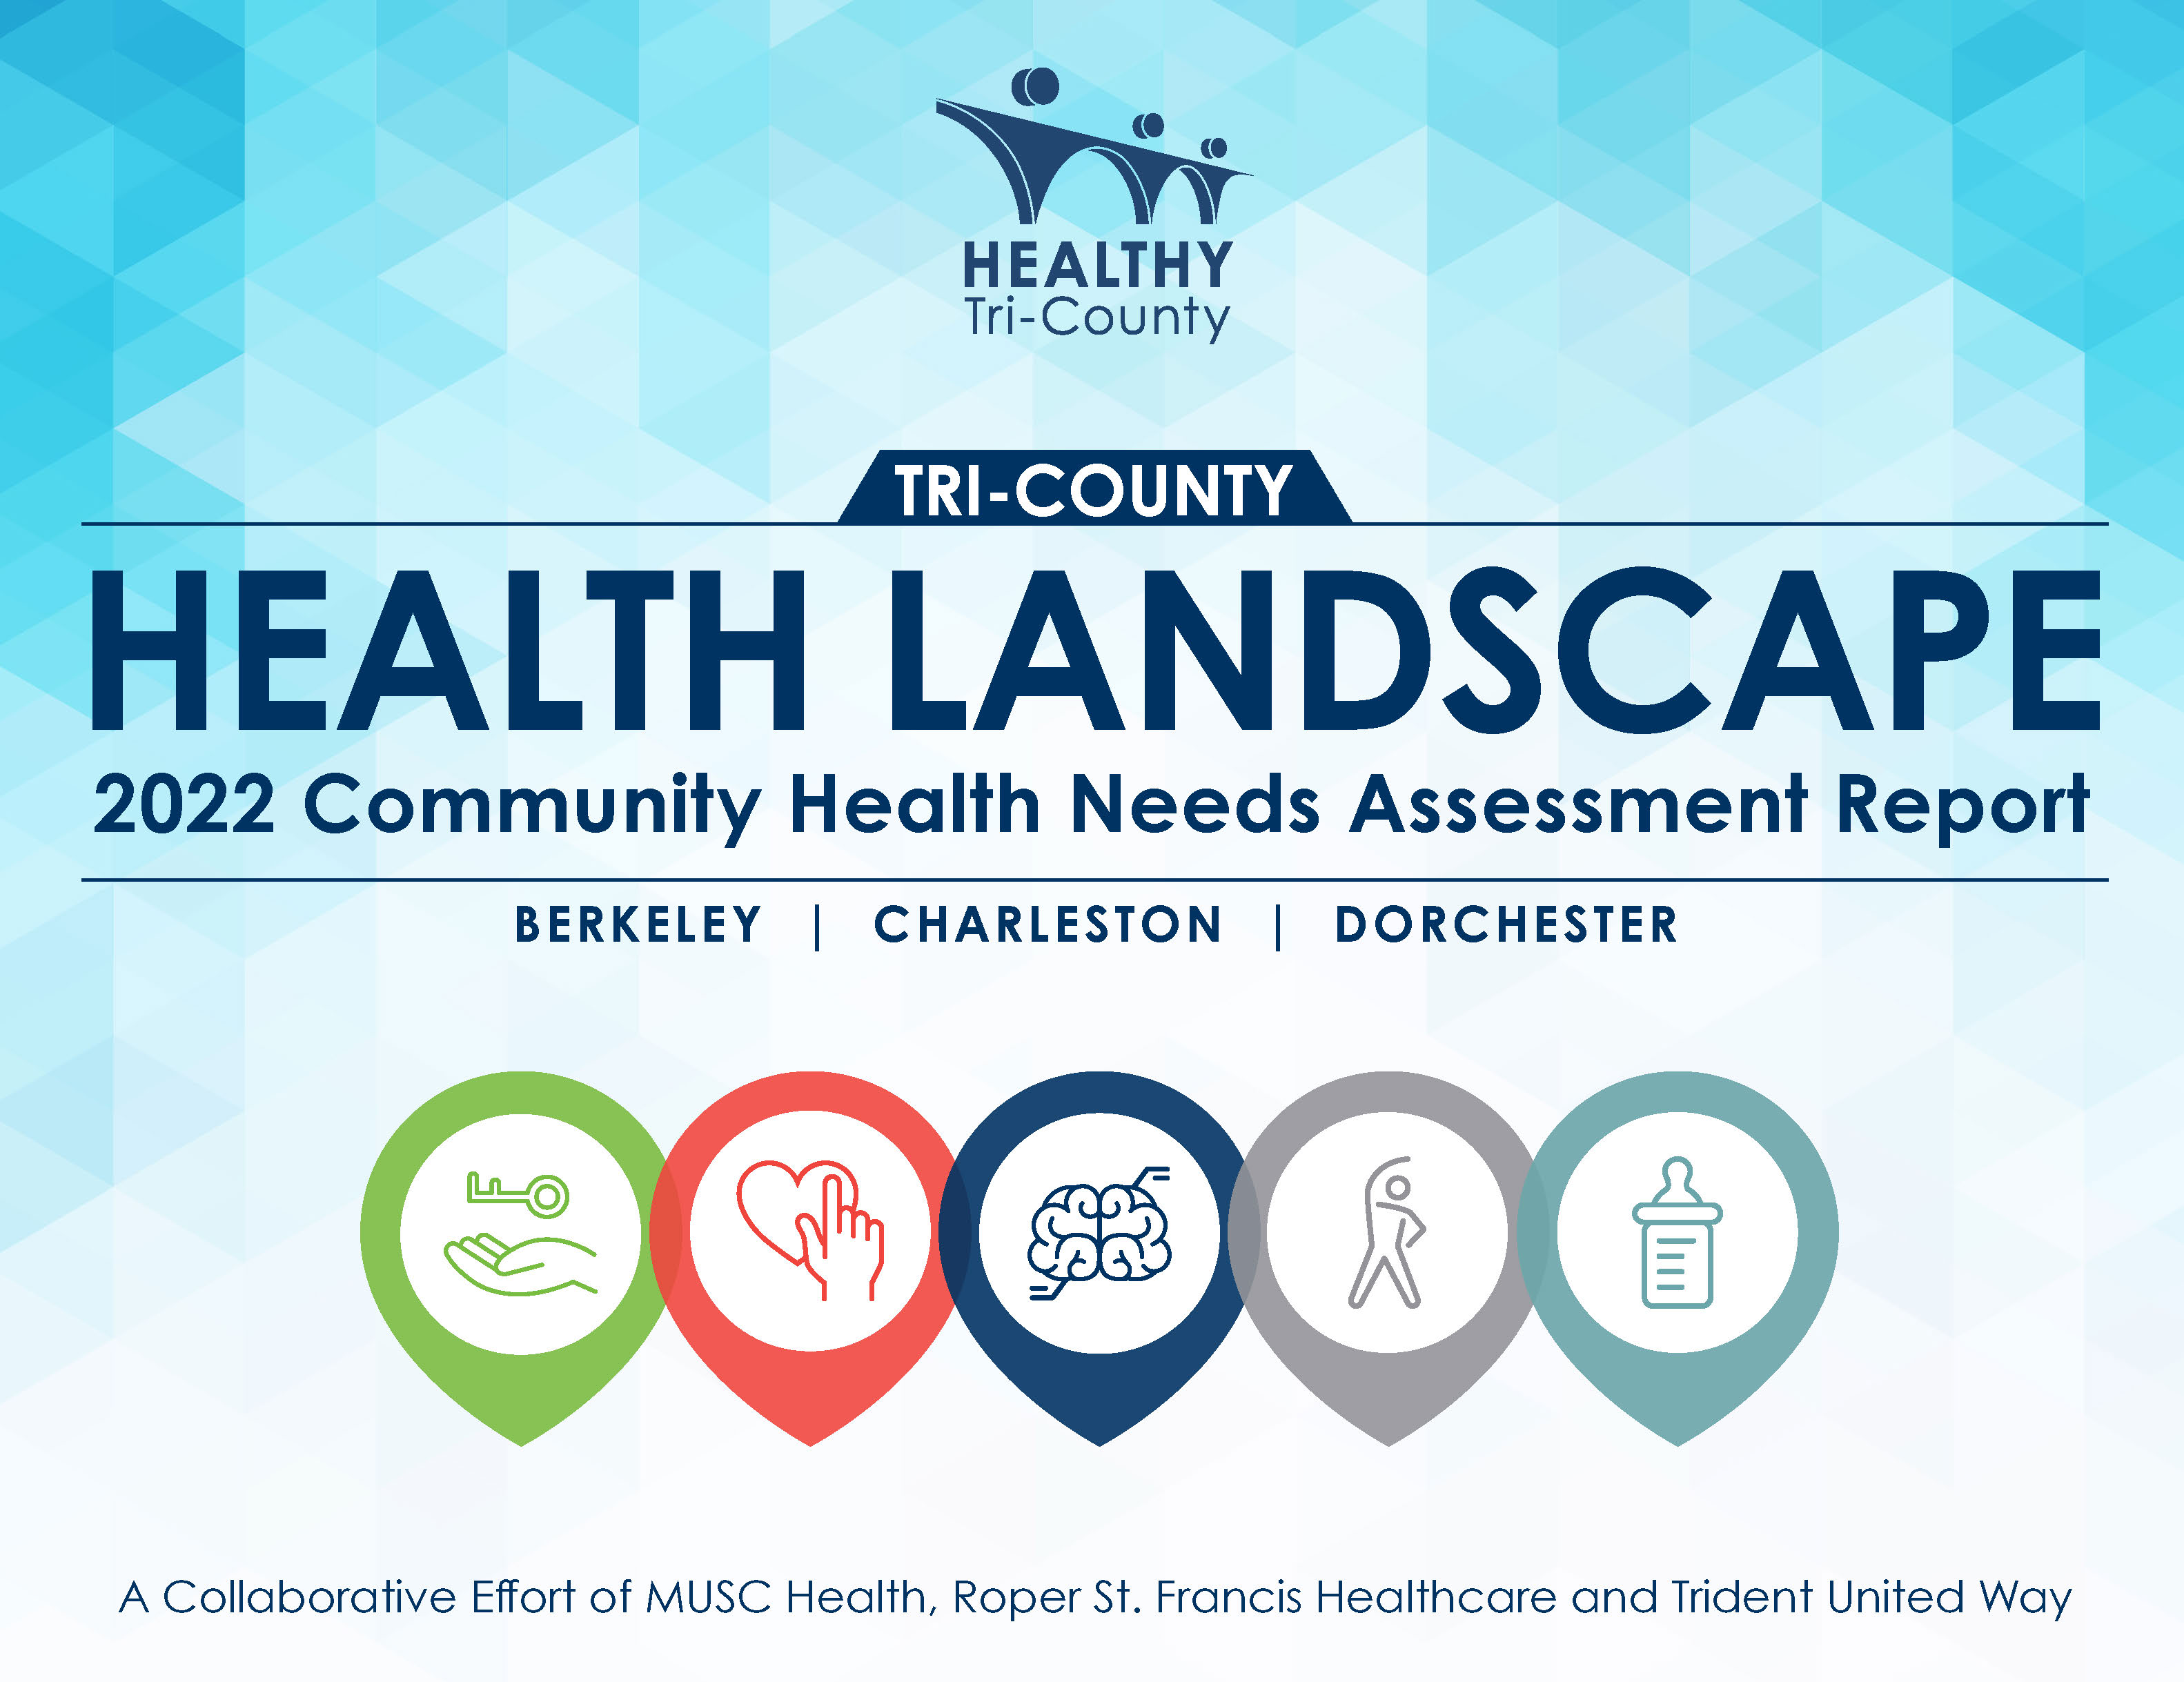 Cover for the 2022 Community Health Needs Assessment Report